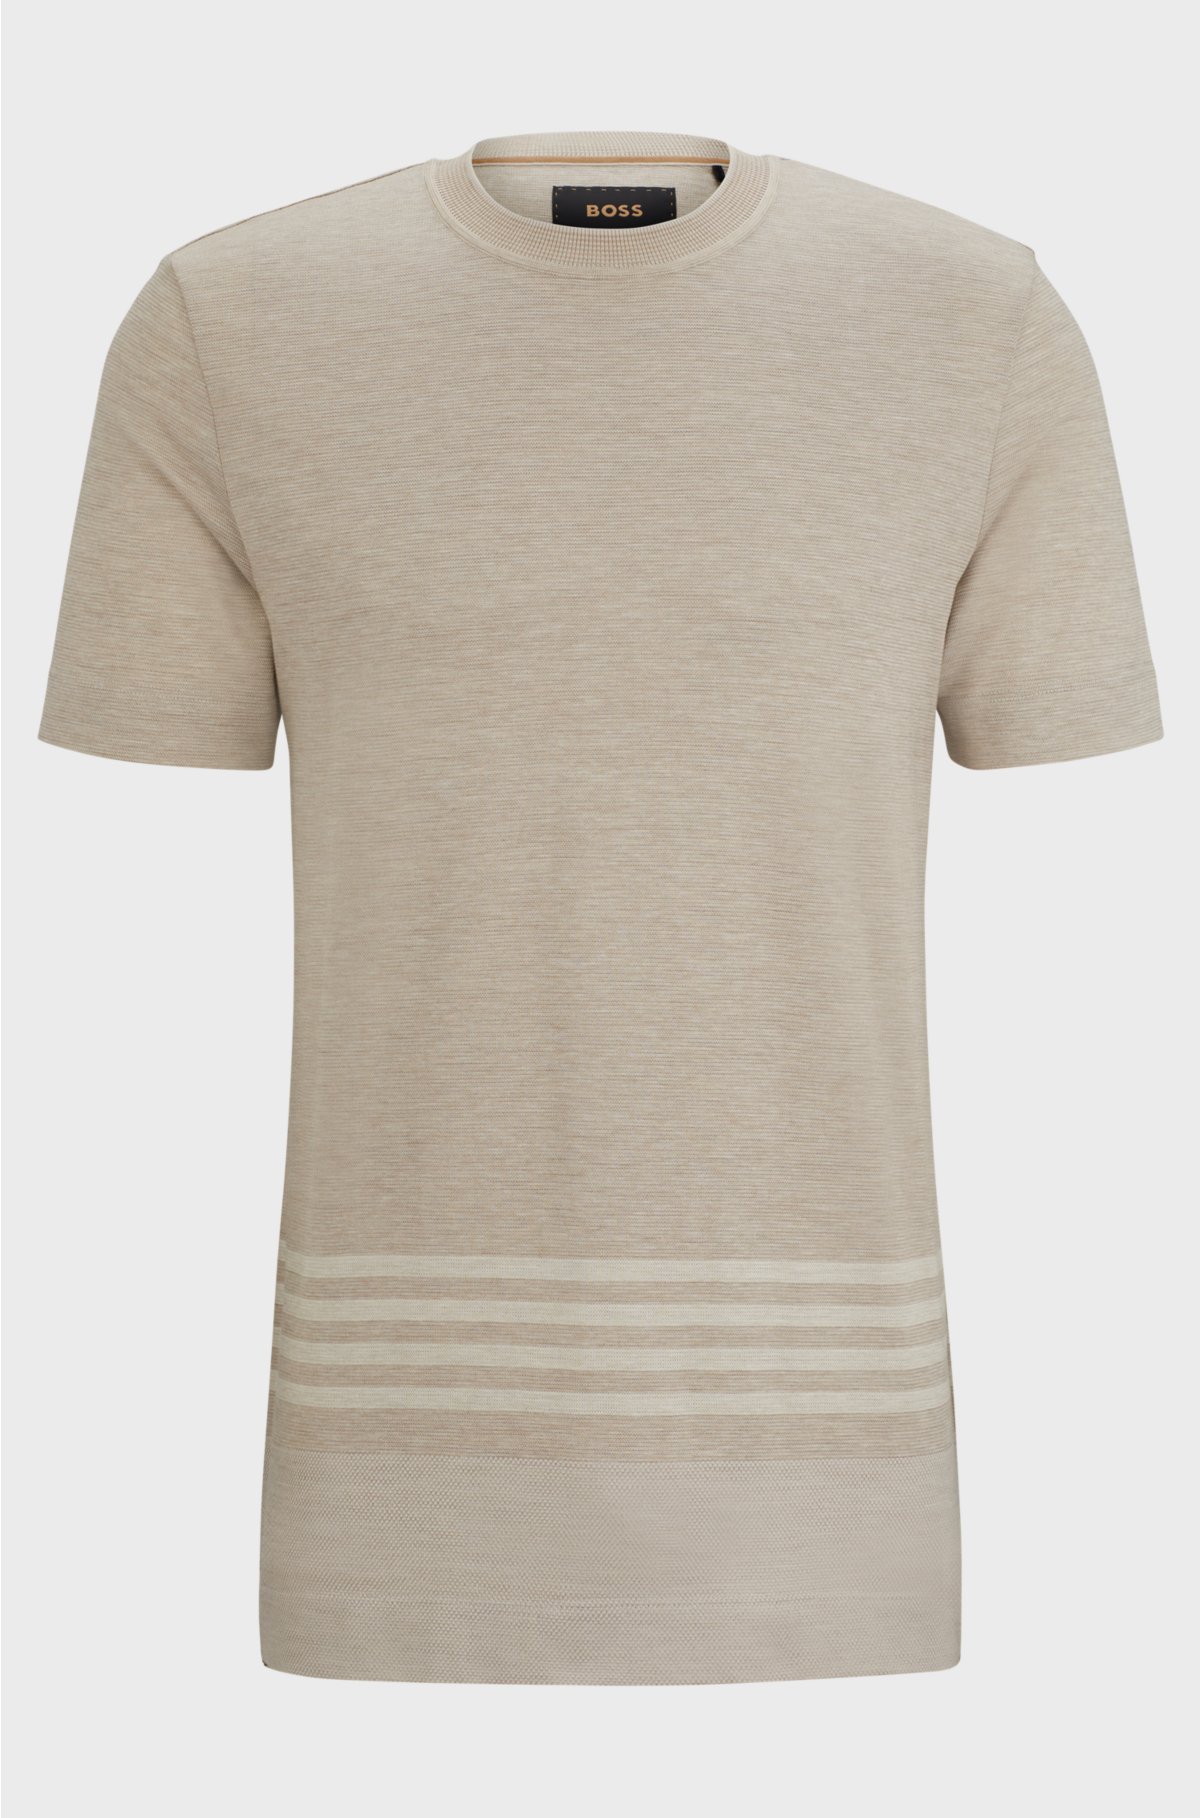 Stripe-detail T-shirt in cotton and silk, Natural